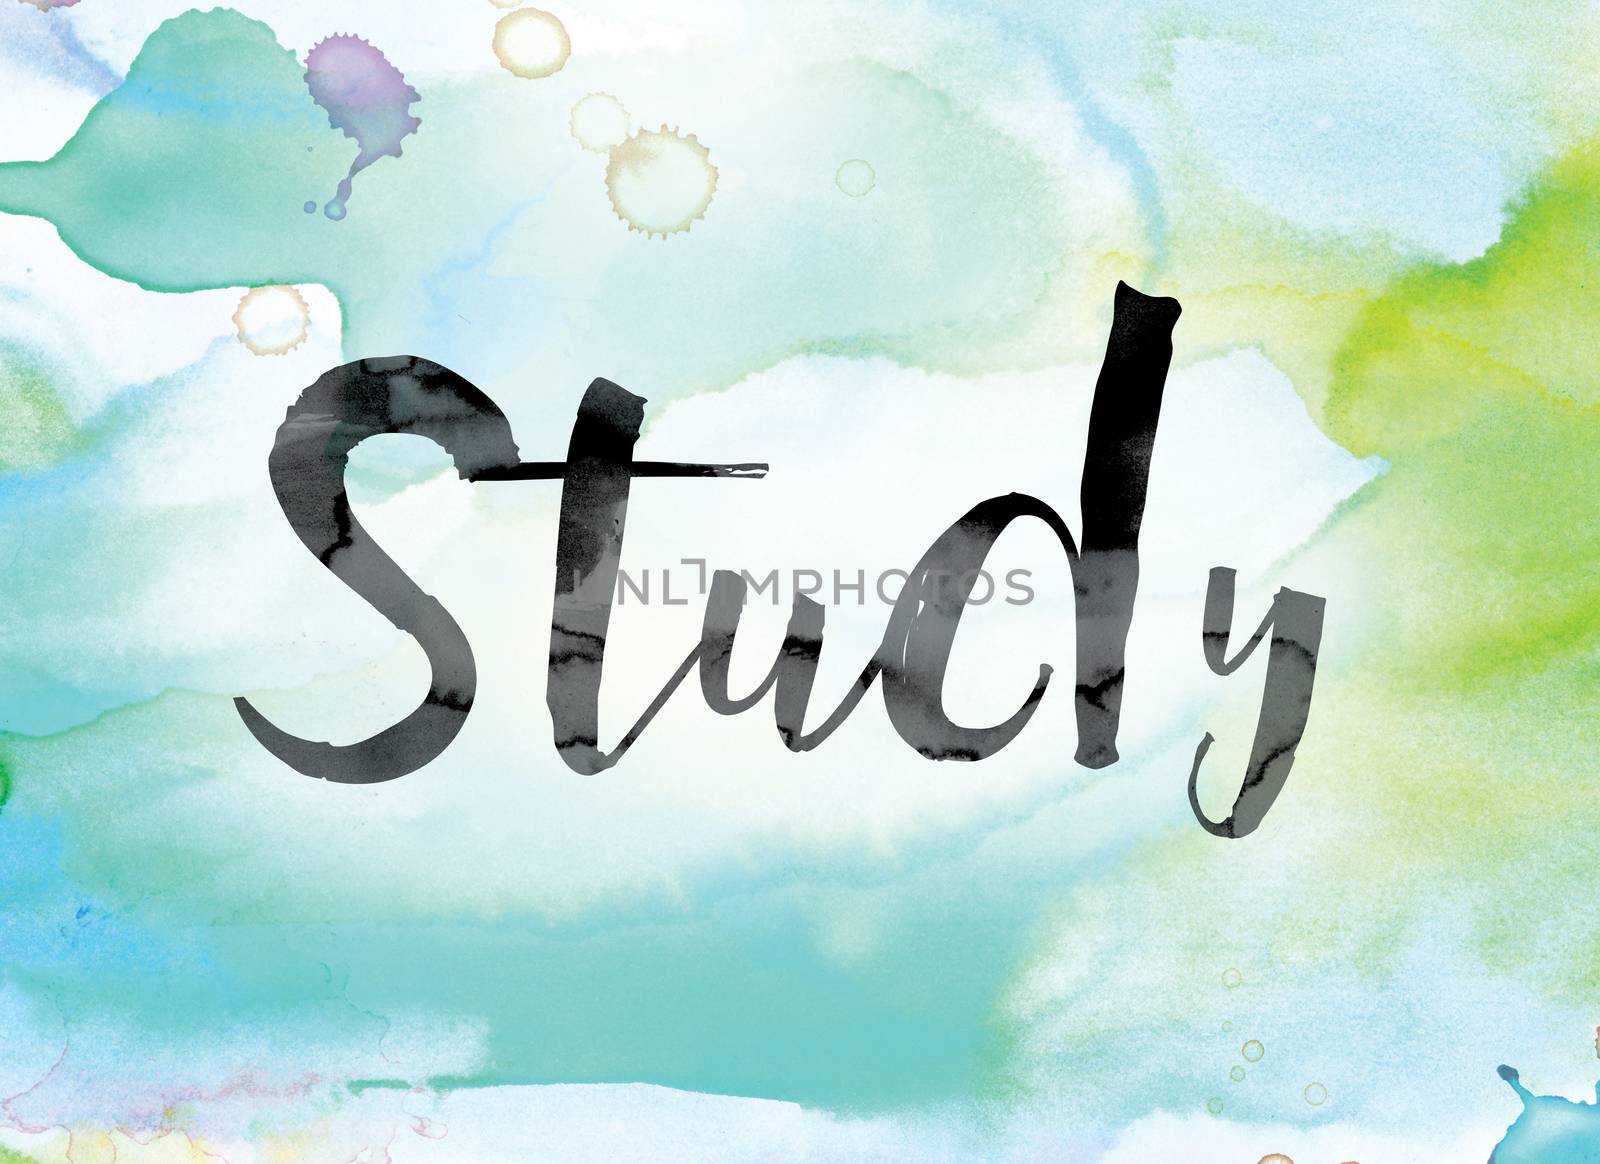 The word "Study" painted in black ink over a colorful watercolor washed background concept and theme.